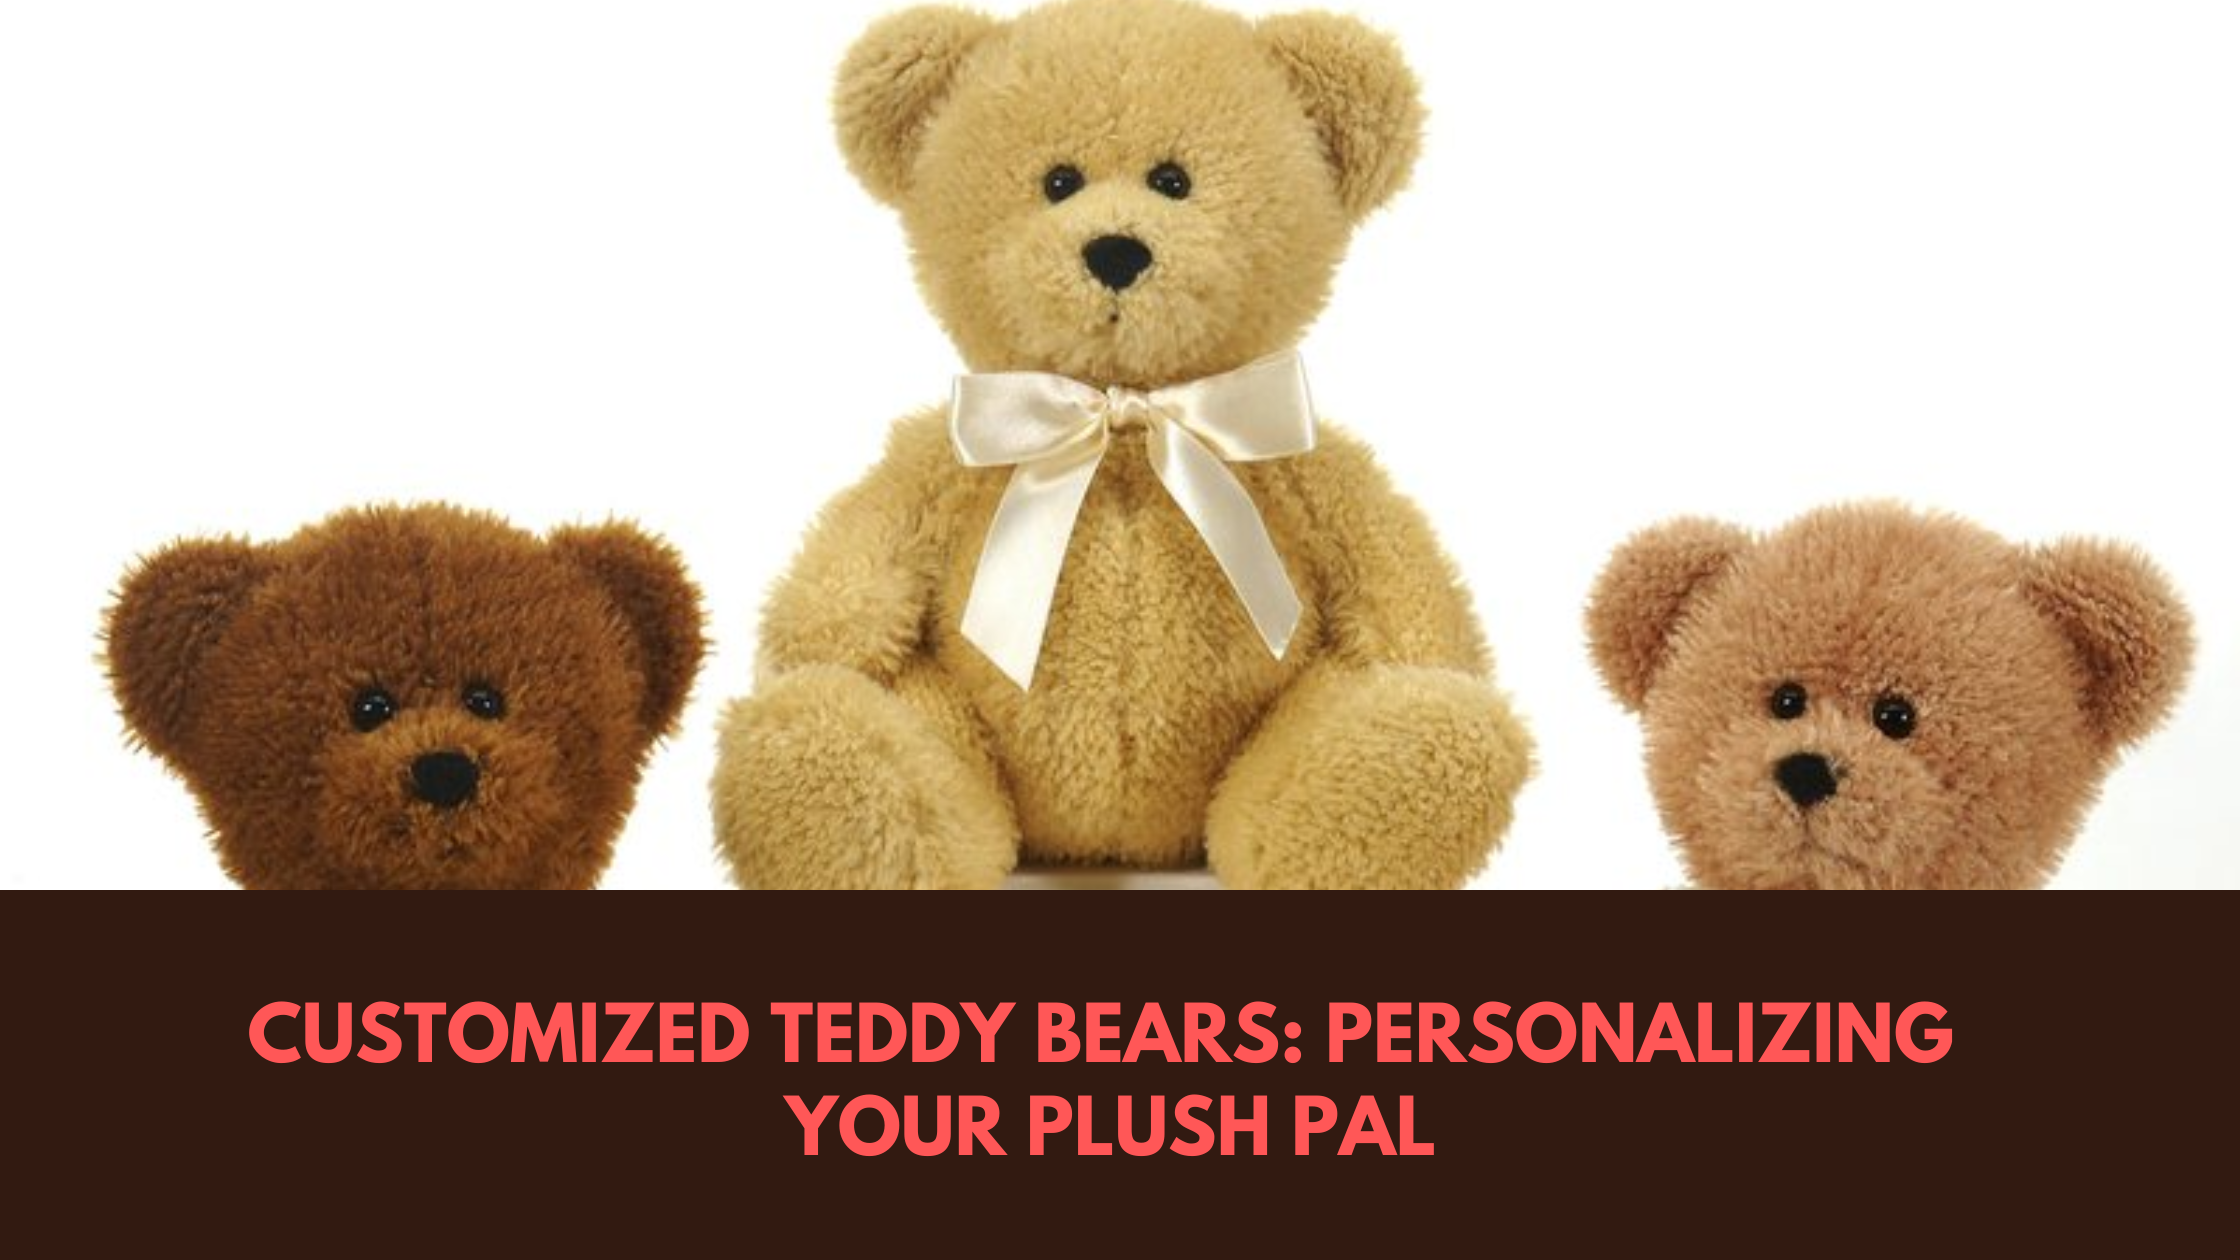 Customized Teddy Bears: Personalizing Your Plush Pal